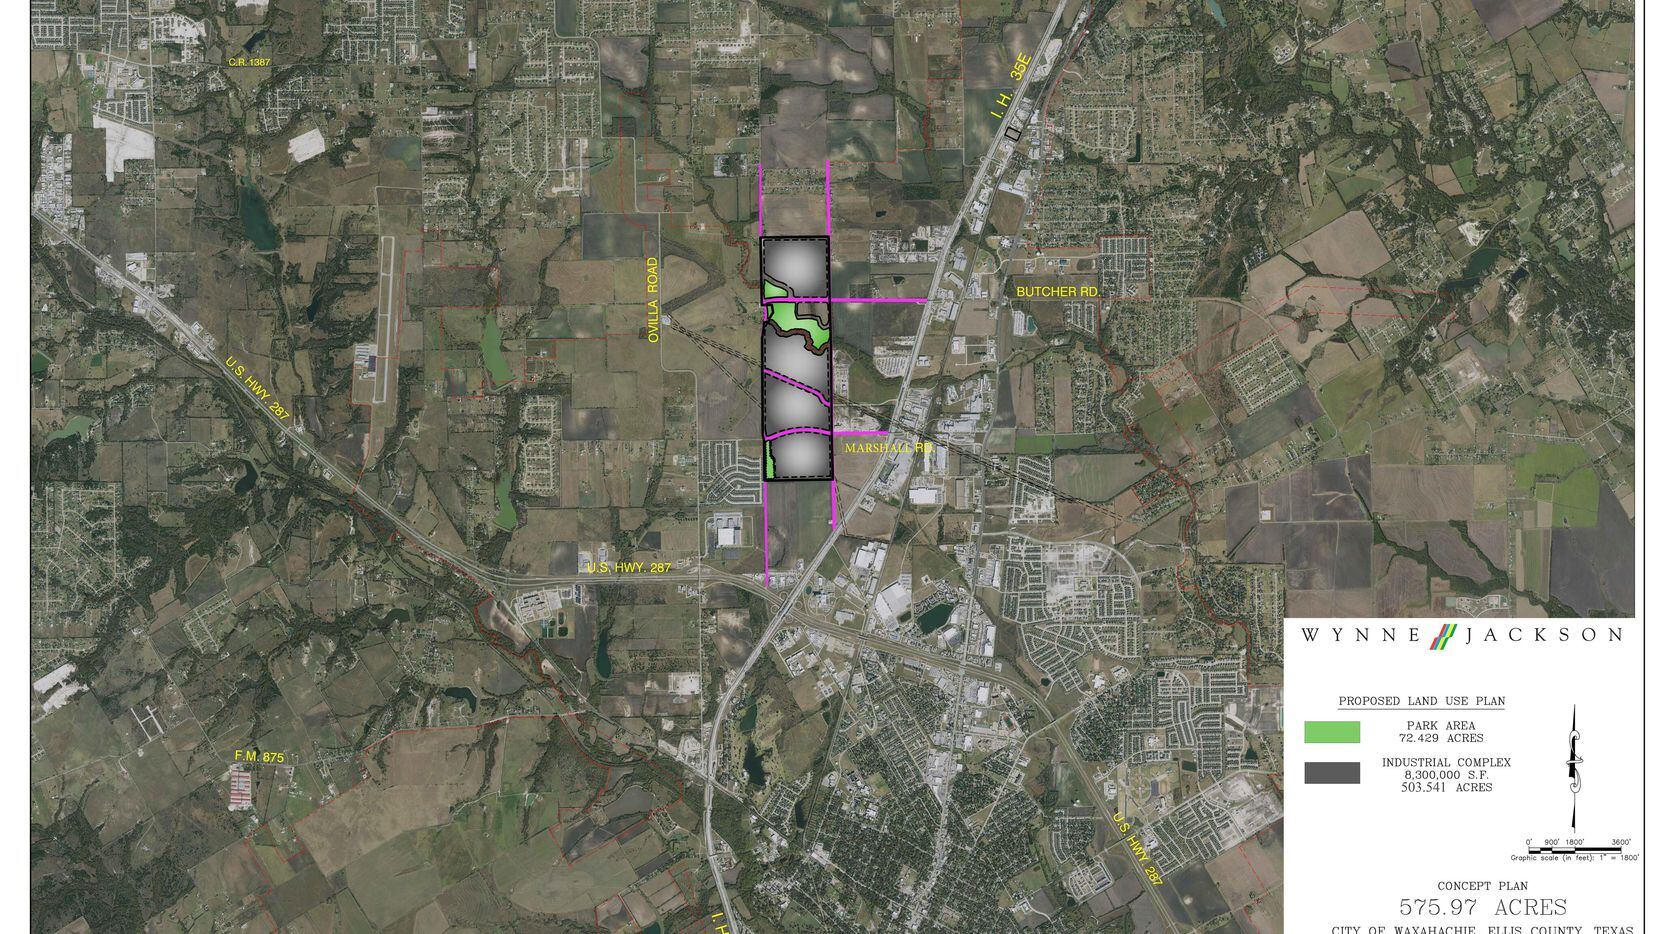 Wynne/Jackson is developing South Grove, a 575-acre industrial project in Waxahachie, in...